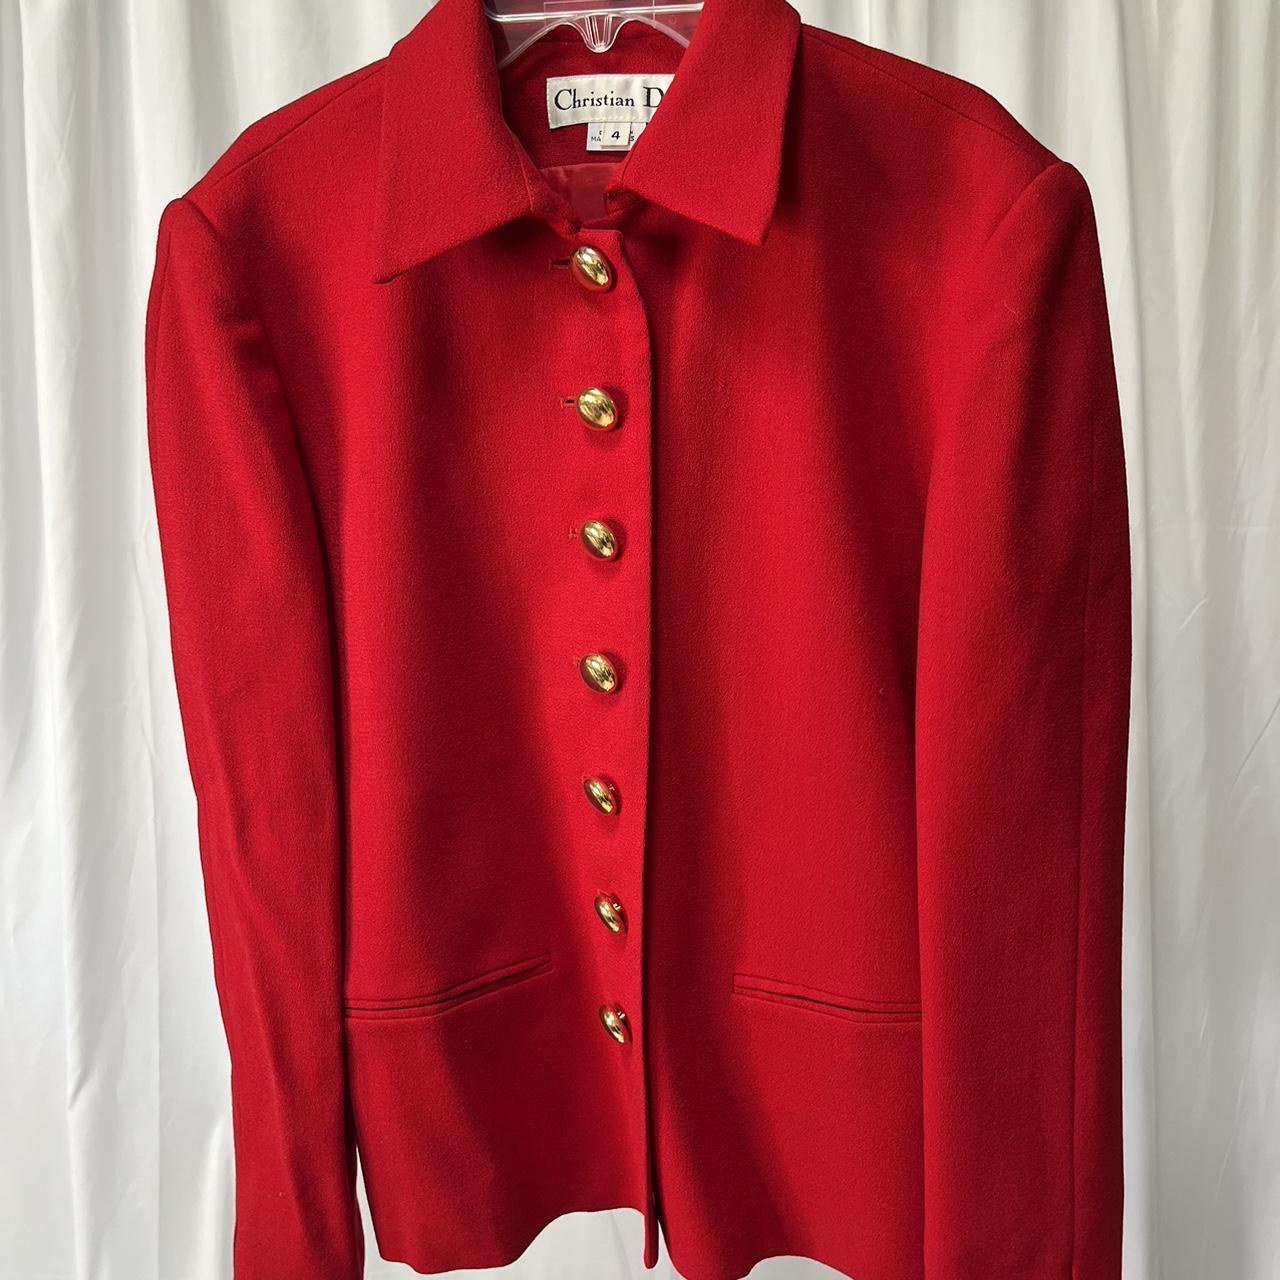 Vintage Christian Dior Jacket This is a red, 100%... - Depop